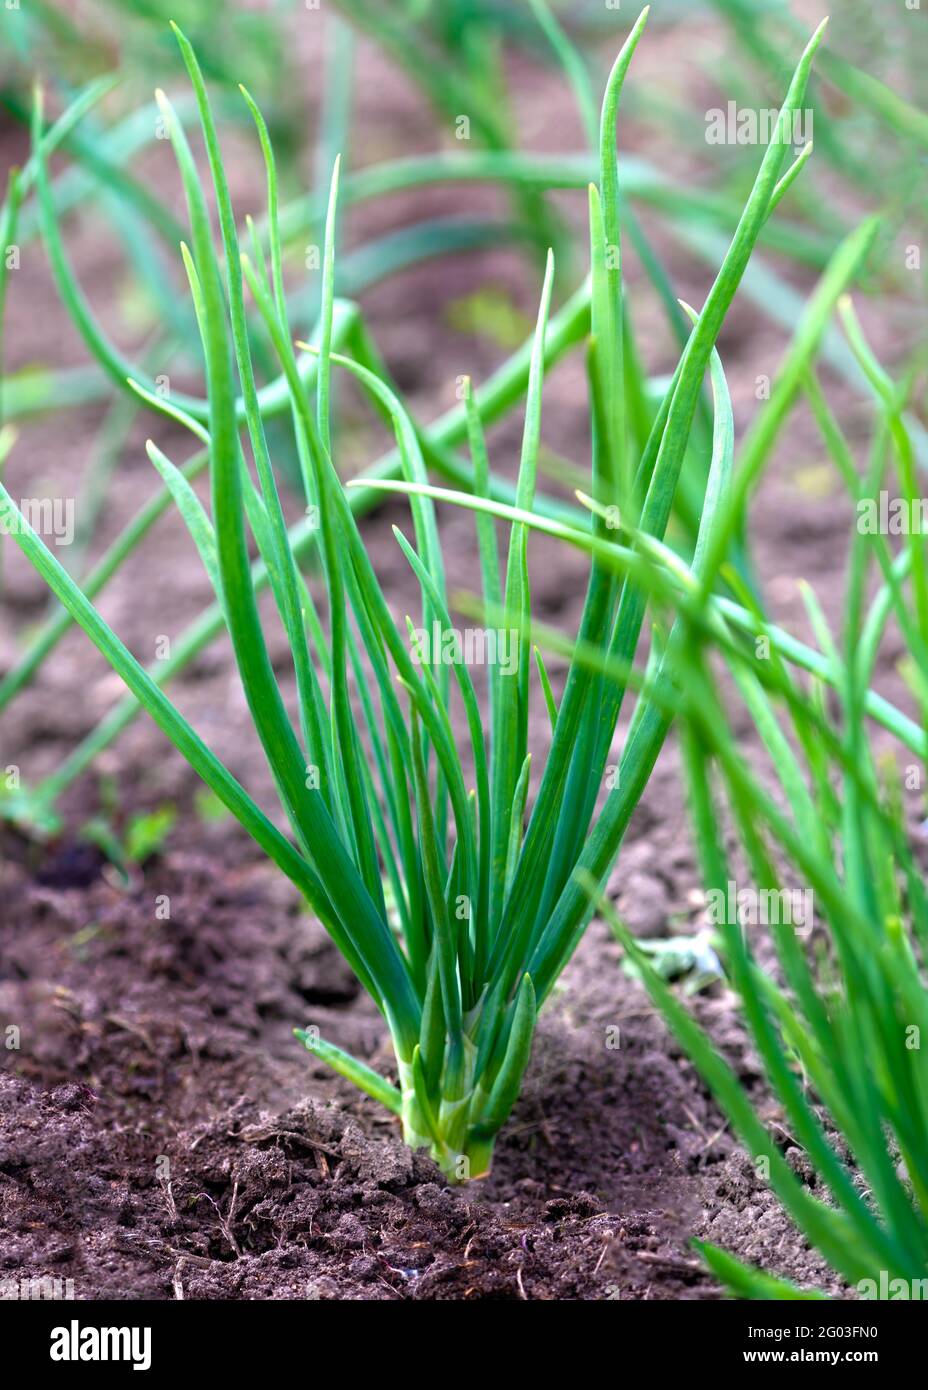 orgnic charlotte onions growing in a garden or allotment  vertical images with blurred background to aid copy space Stock Photo